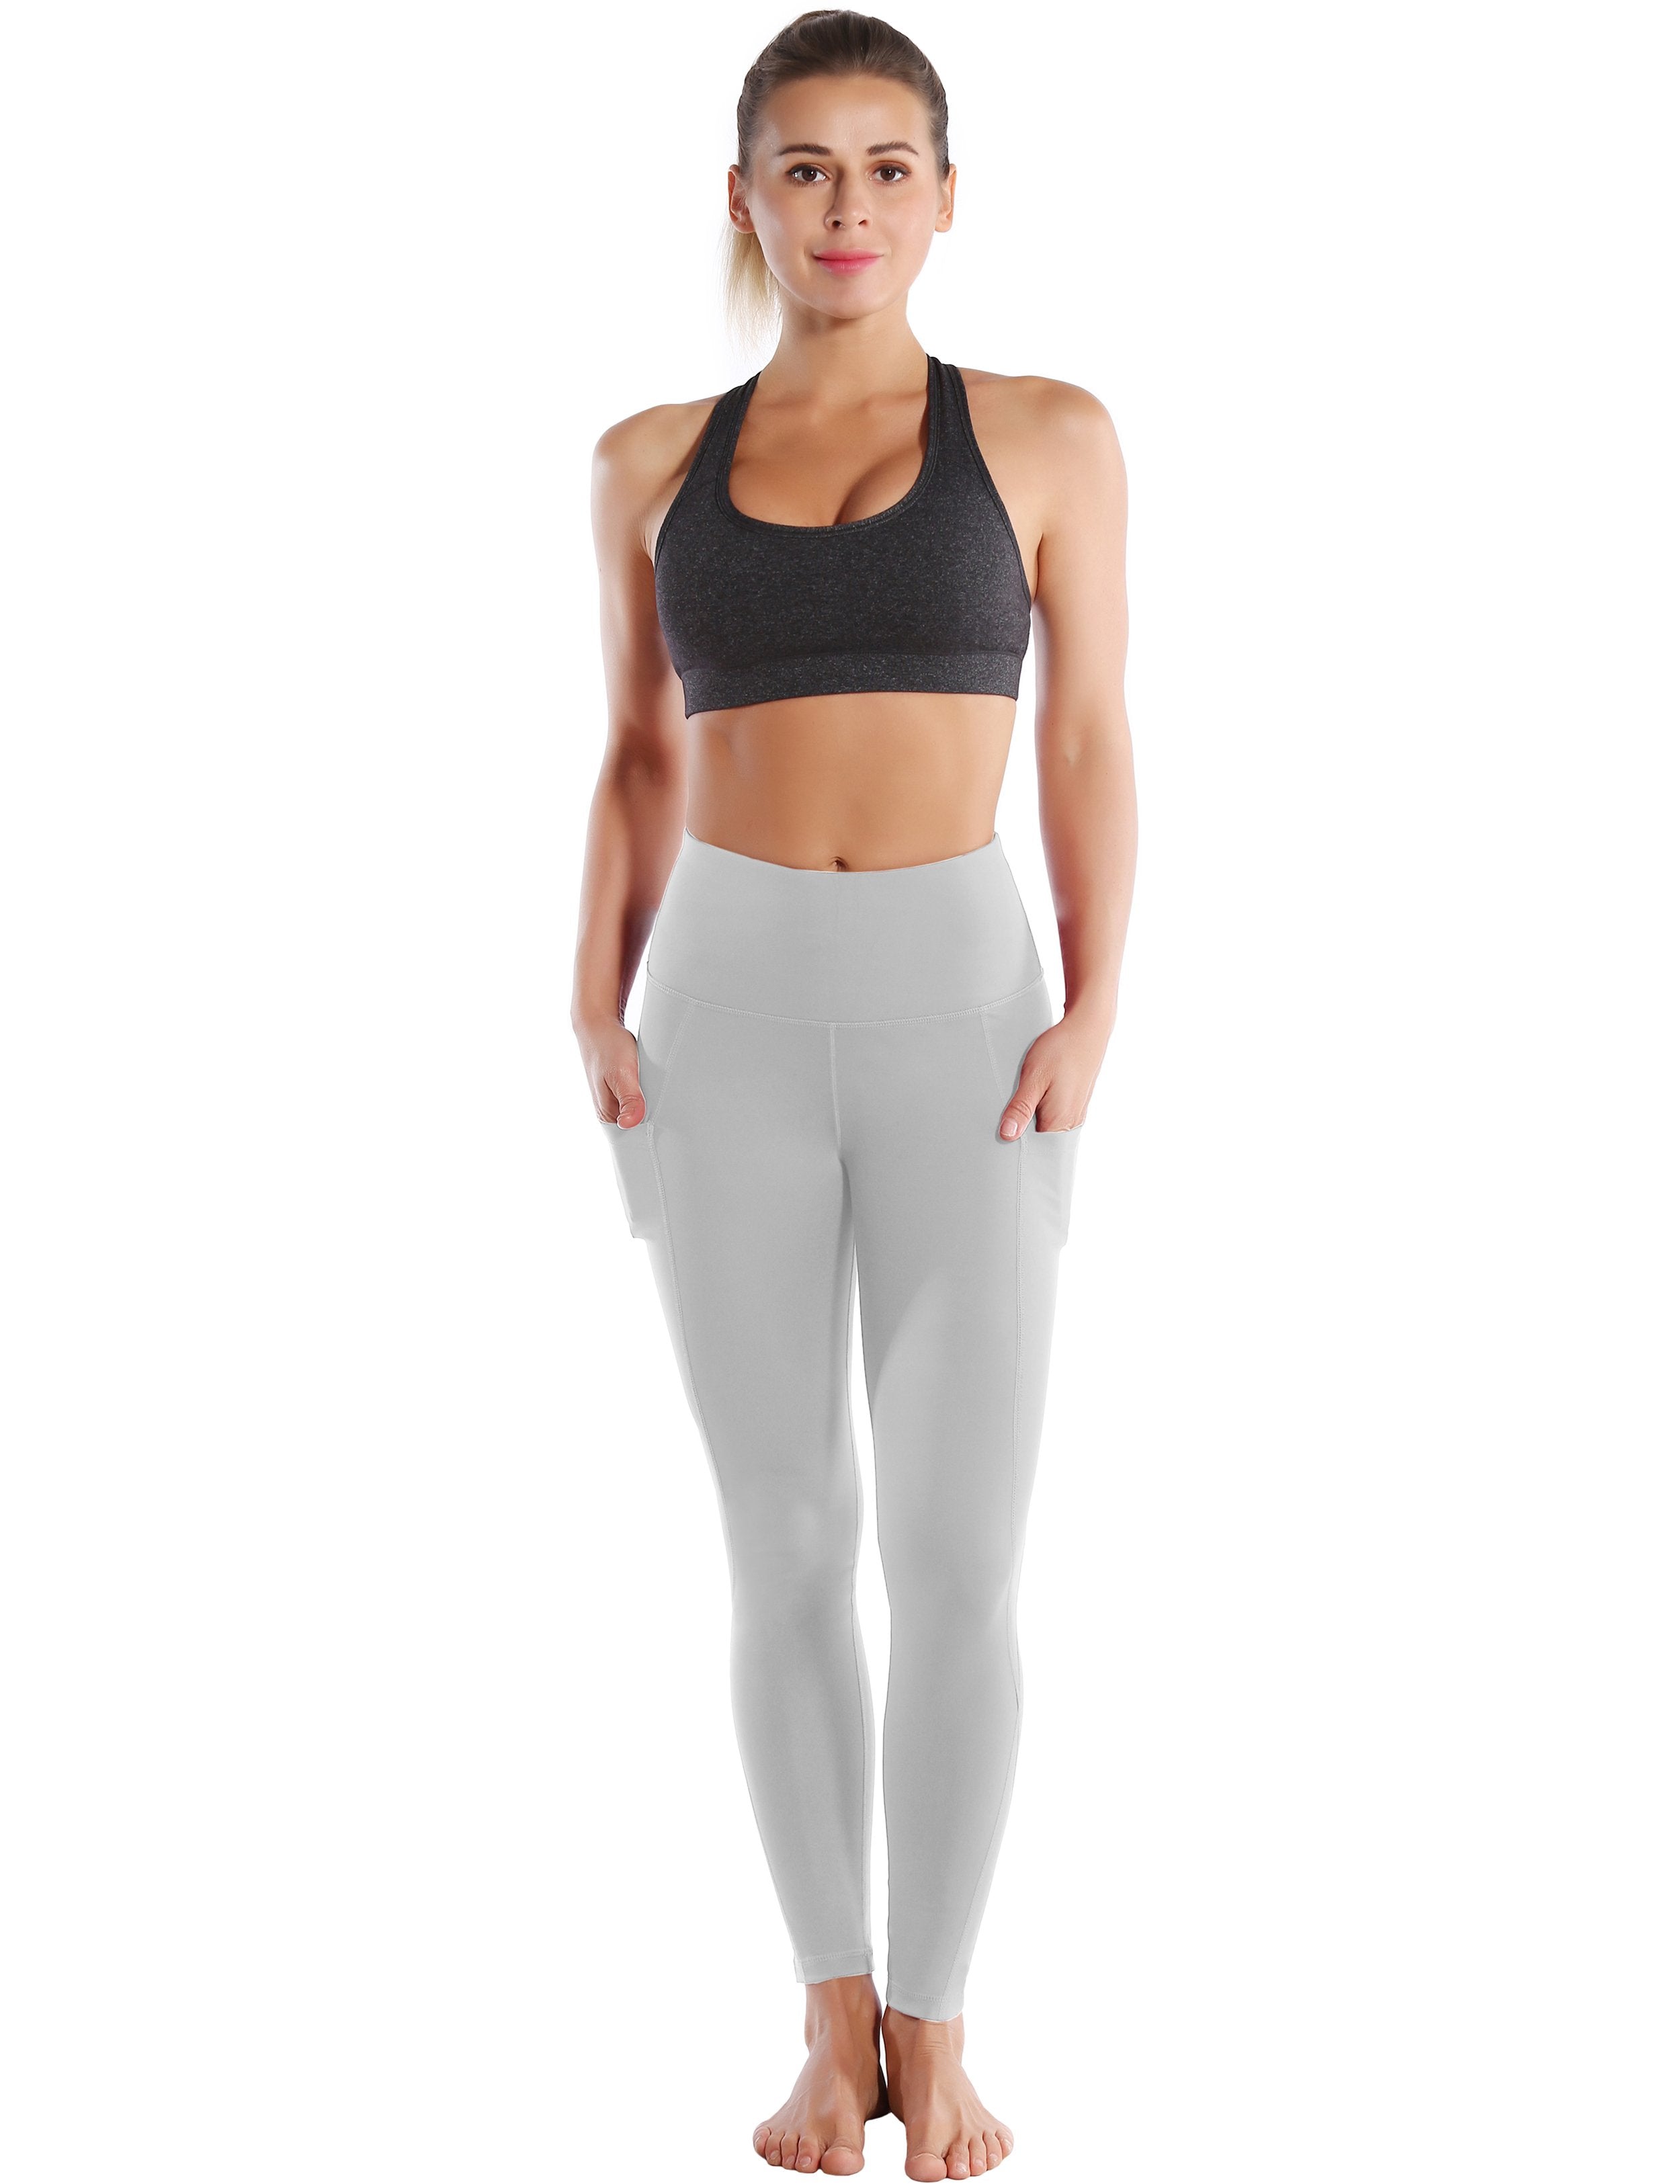 Zuvelli High Waist Yoga Pants with Side-Pockets, Workout and Running  Activewear for Women, High Waisted Tummy Control, Non-See-Through 4 Way  Stretch